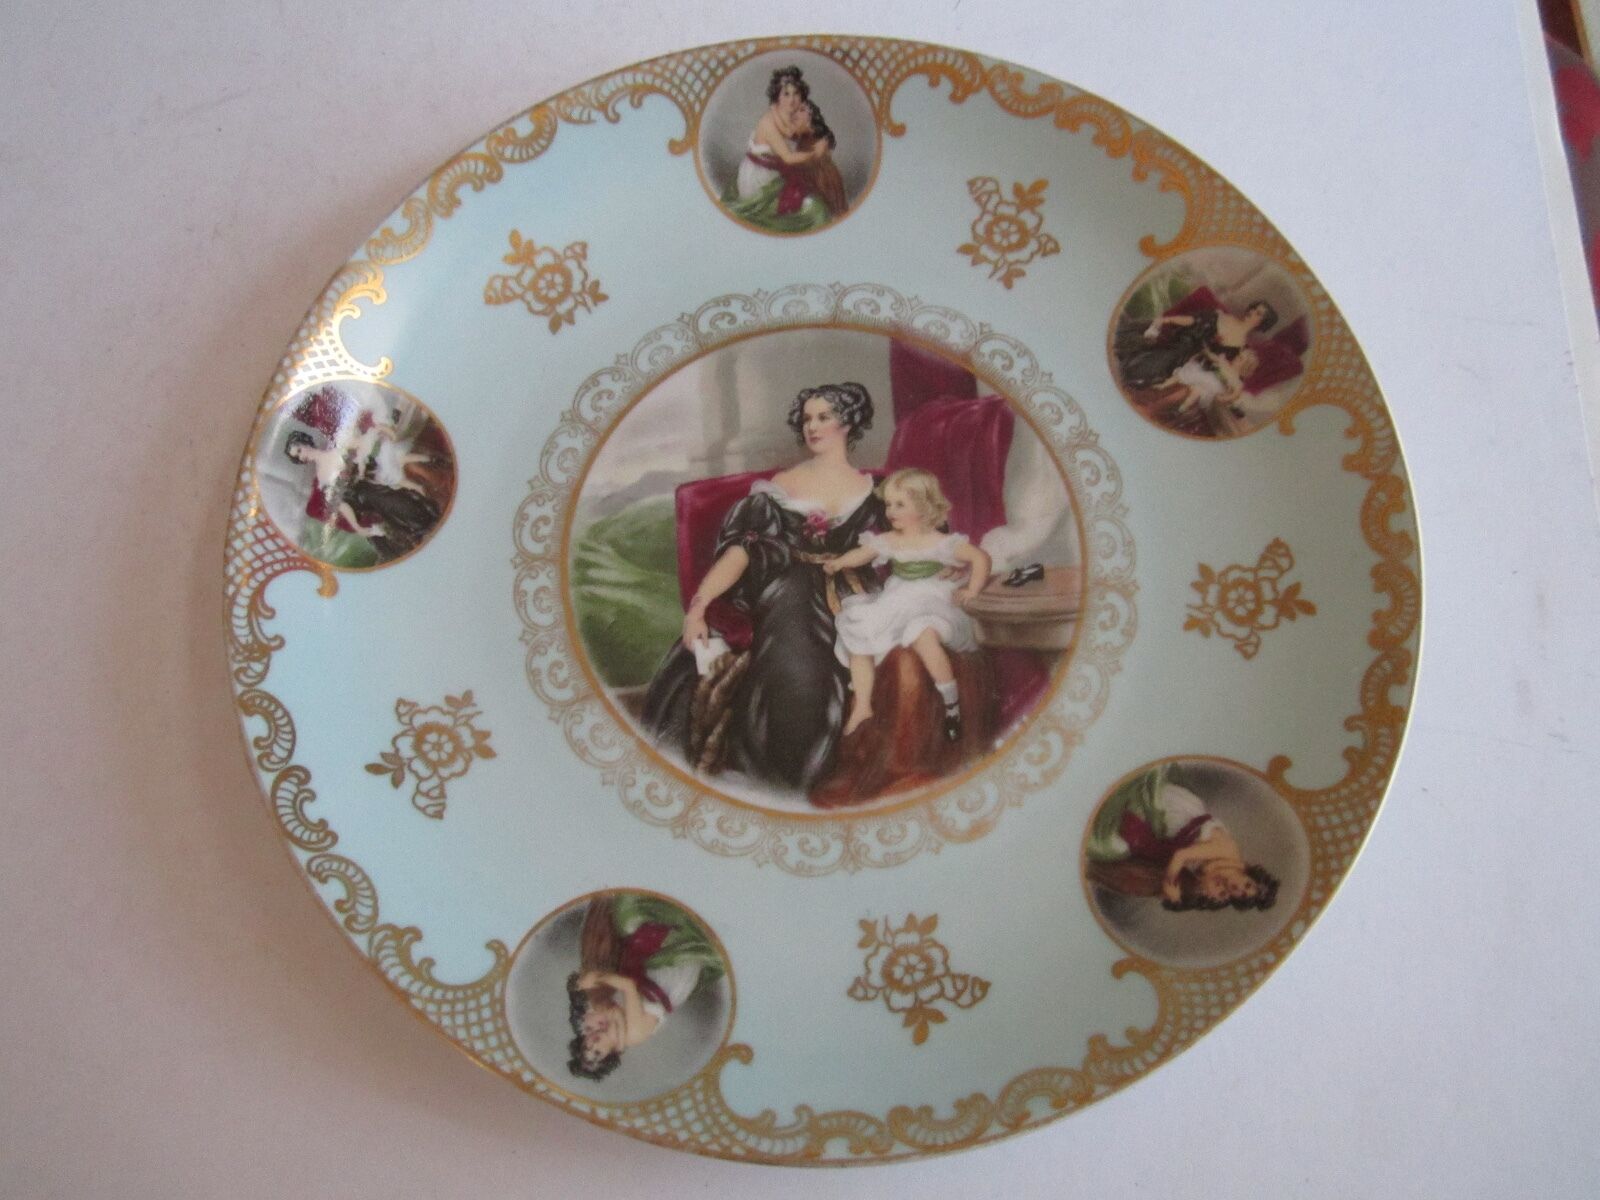 VTG MITTERTEICH DECORATIVE PLATE - MADE IN GERMANY - RARE COLOR - 10 1/2